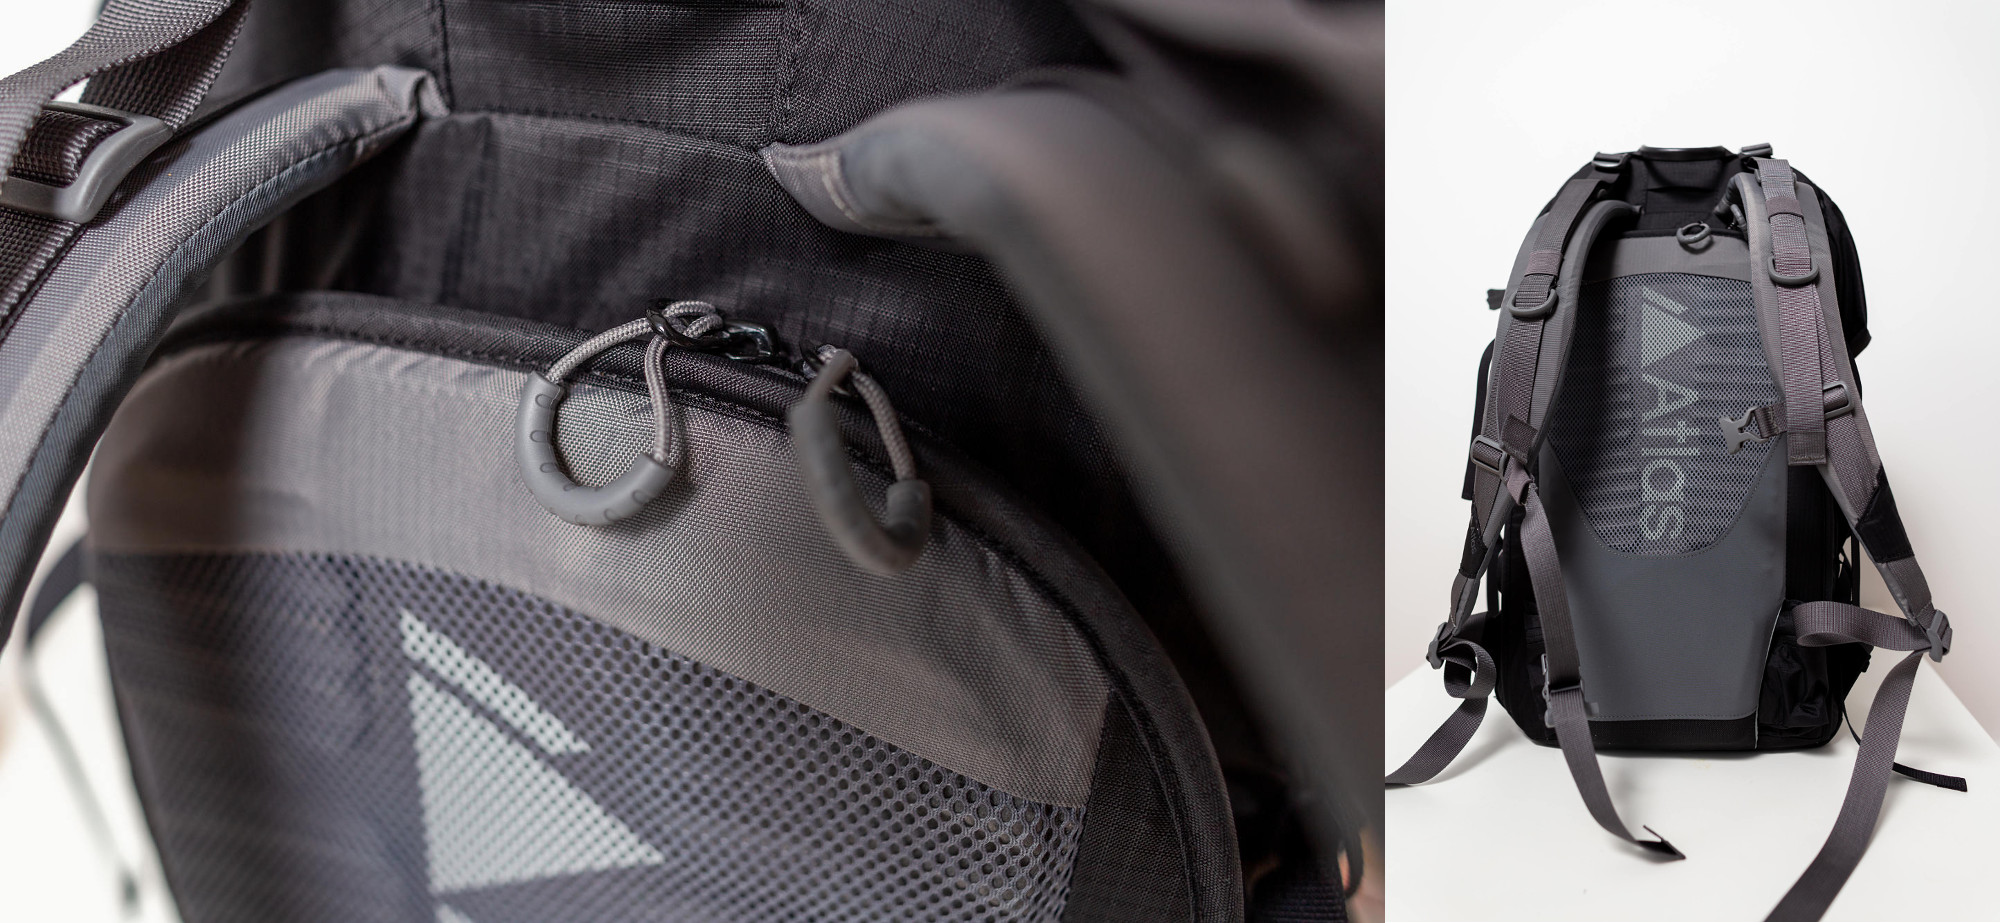 camera-backpack-review-atlas-athlete-19